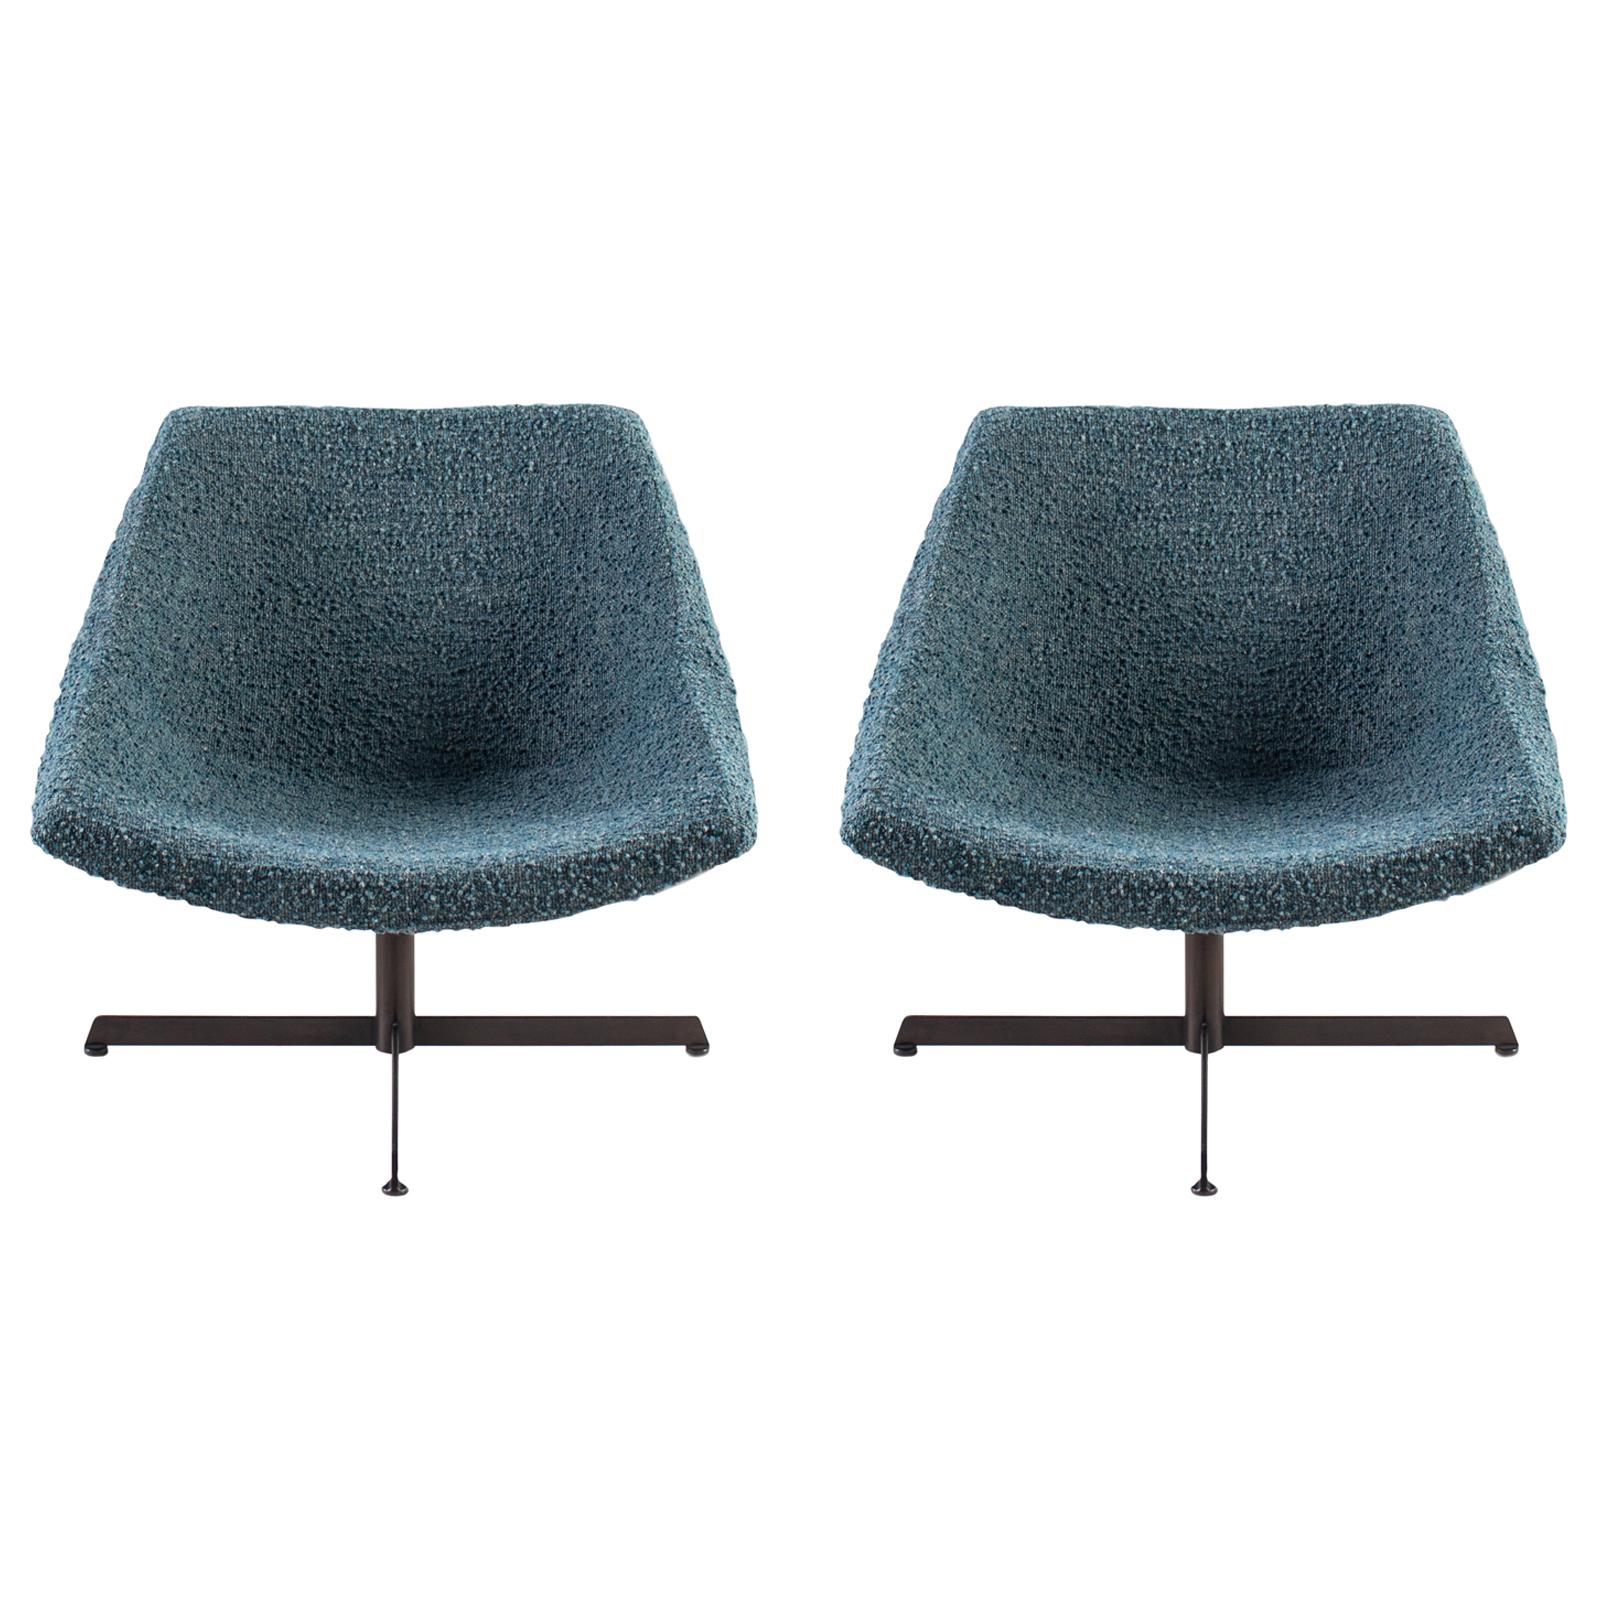 Pair of Mid-Century Modern Chairs Newly Upholstered in Italian Bouche